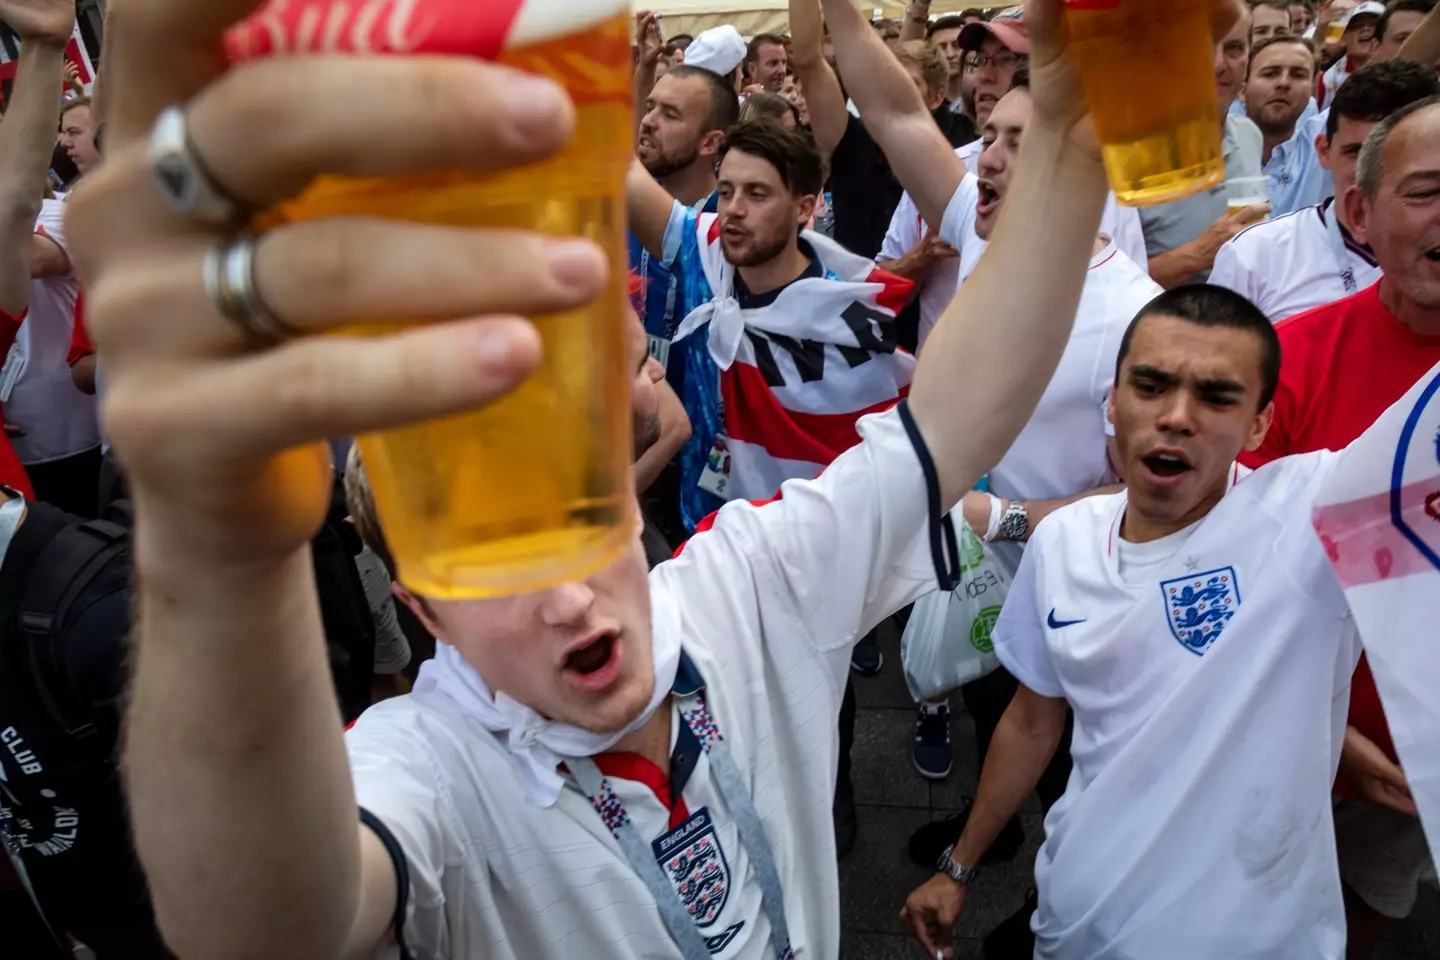 England fans have been warned about drinking too much in Qatar.